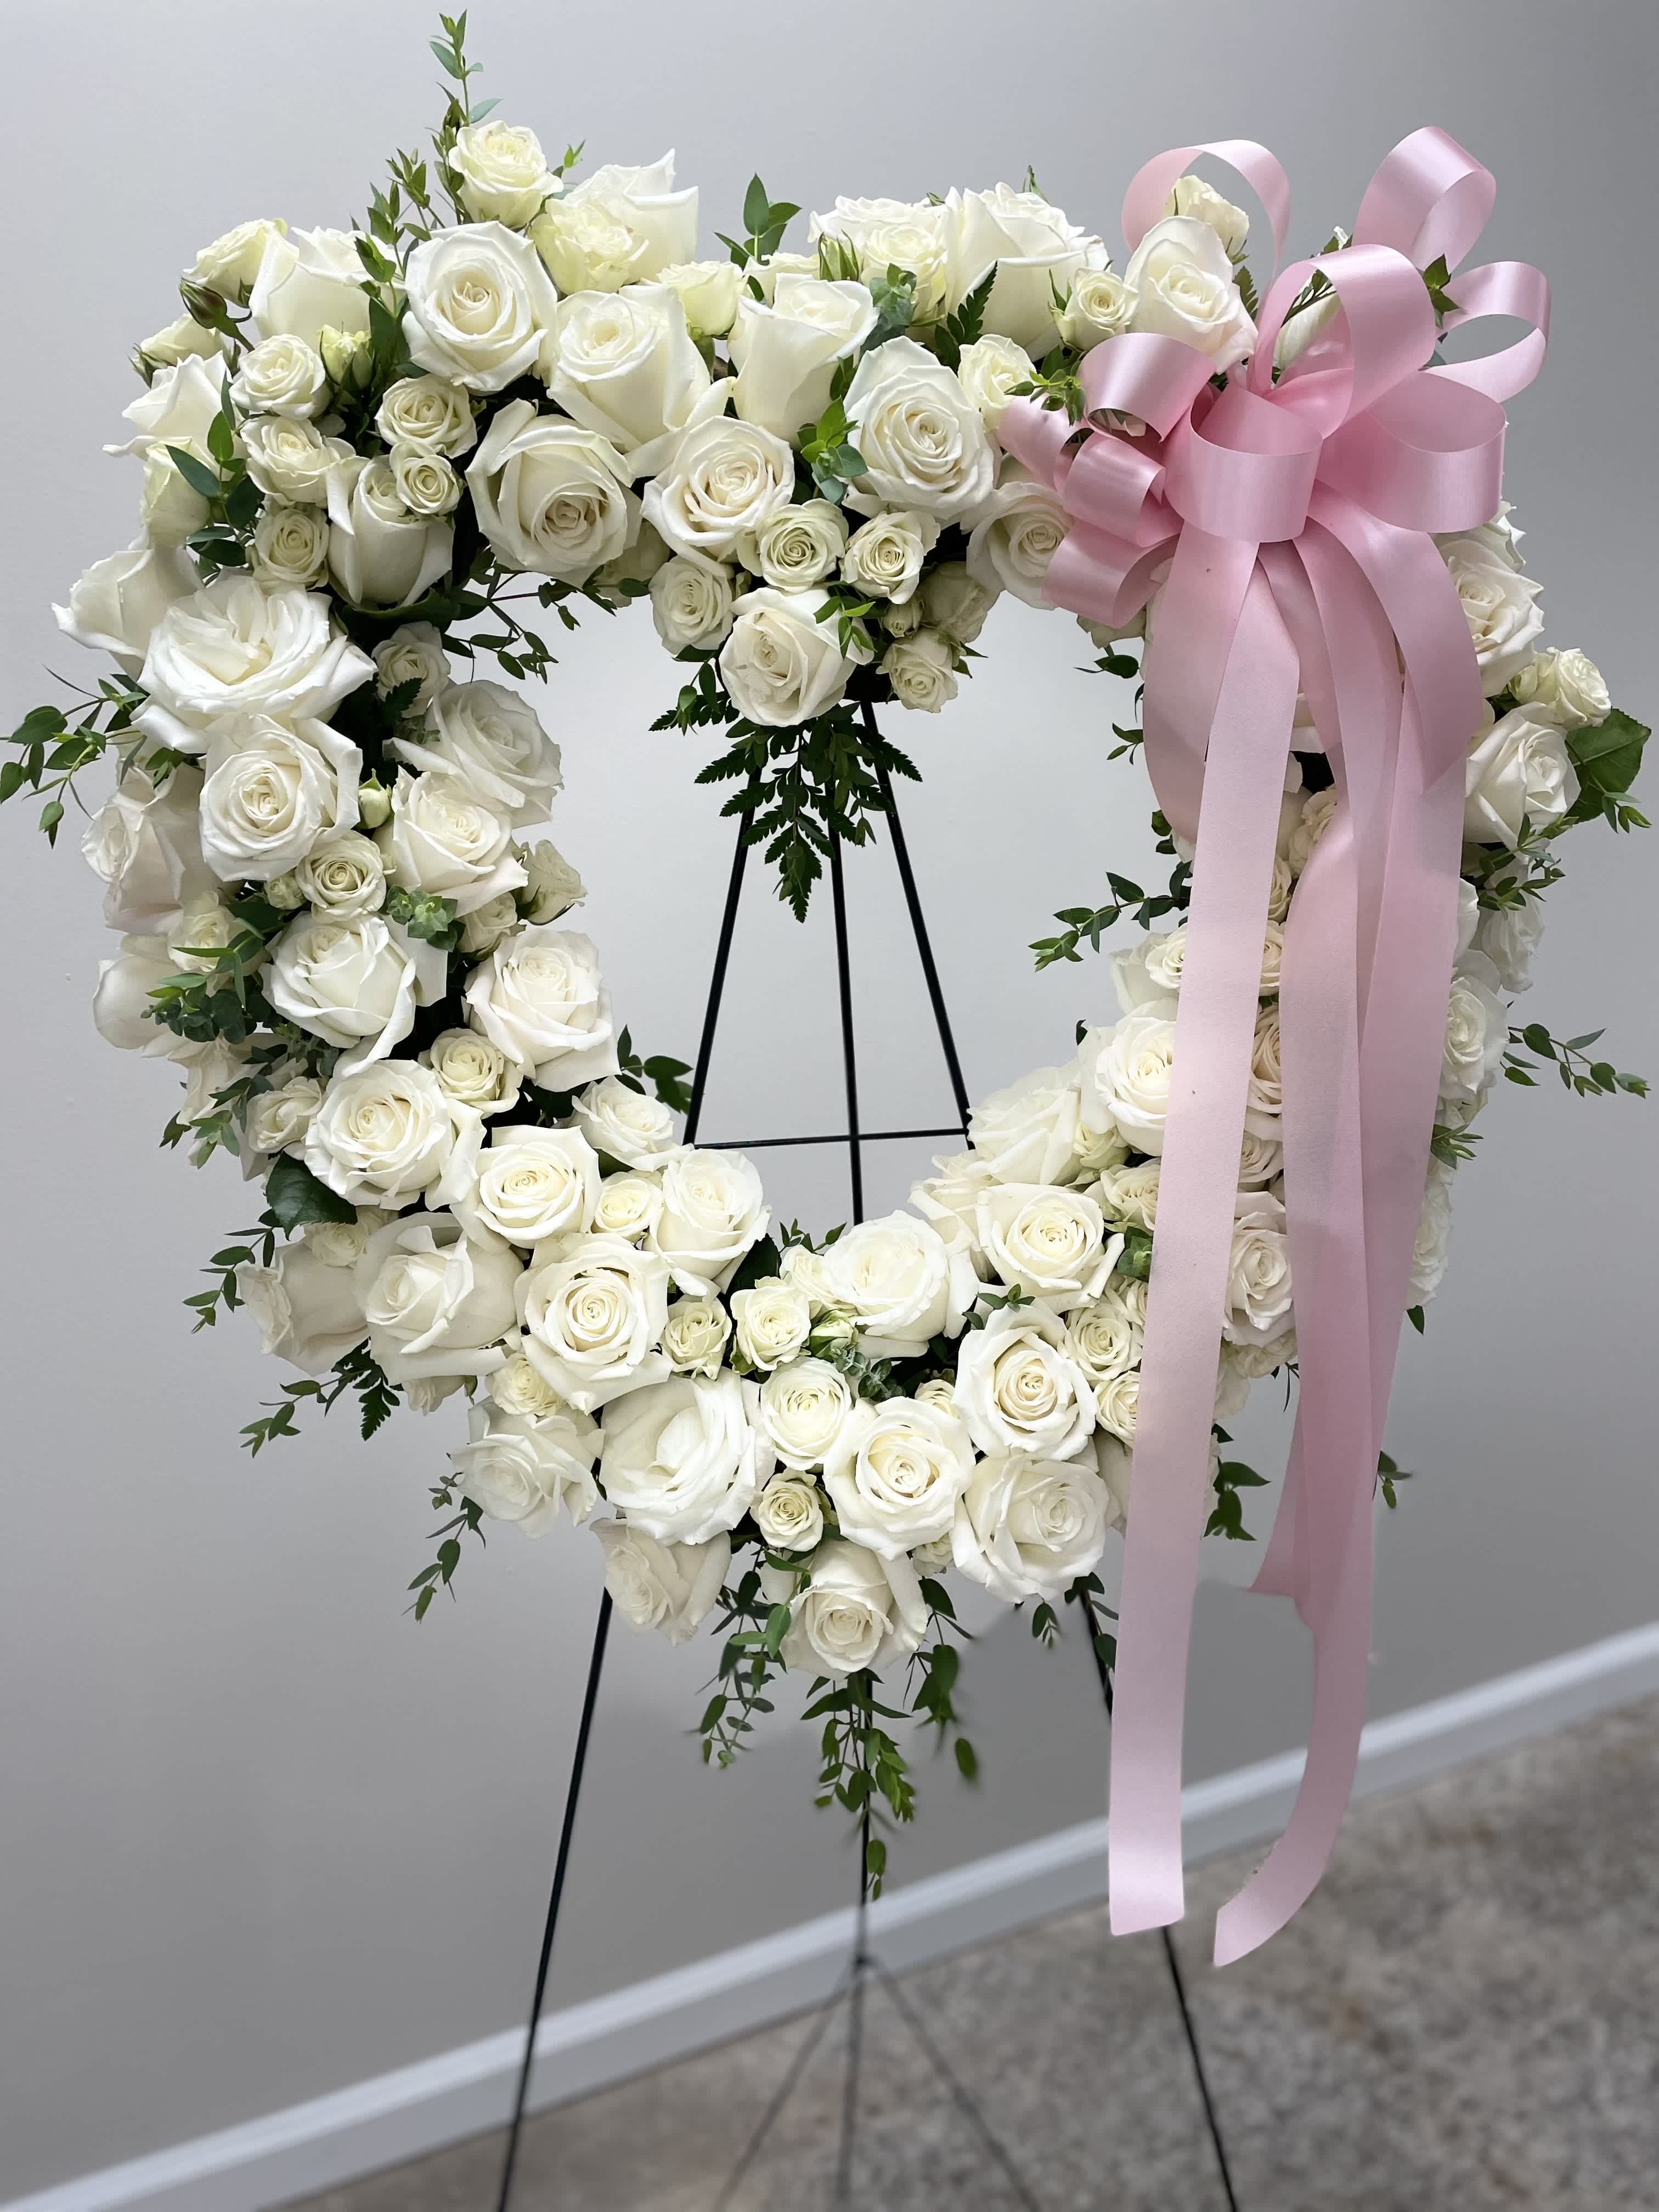 Gentle Whisper Open Heart - Our exquisite heart-shaped standing spray floral arrangement, a touching tribute crafted with pristine white roses and adorned with lush green plant accents. Symbolizing purity and eternal love, the delicate roses are arranged in the shape of a heart, evoking feelings of compassion and solace. To add a personal touch, a pink bow graces the arrangement, though it can be customized to any color of your choosing. Perfect for honoring a cherished loved one, this heartfelt creation offers a comforting presence and serves as a beautiful reminder of enduring love and fond memories.